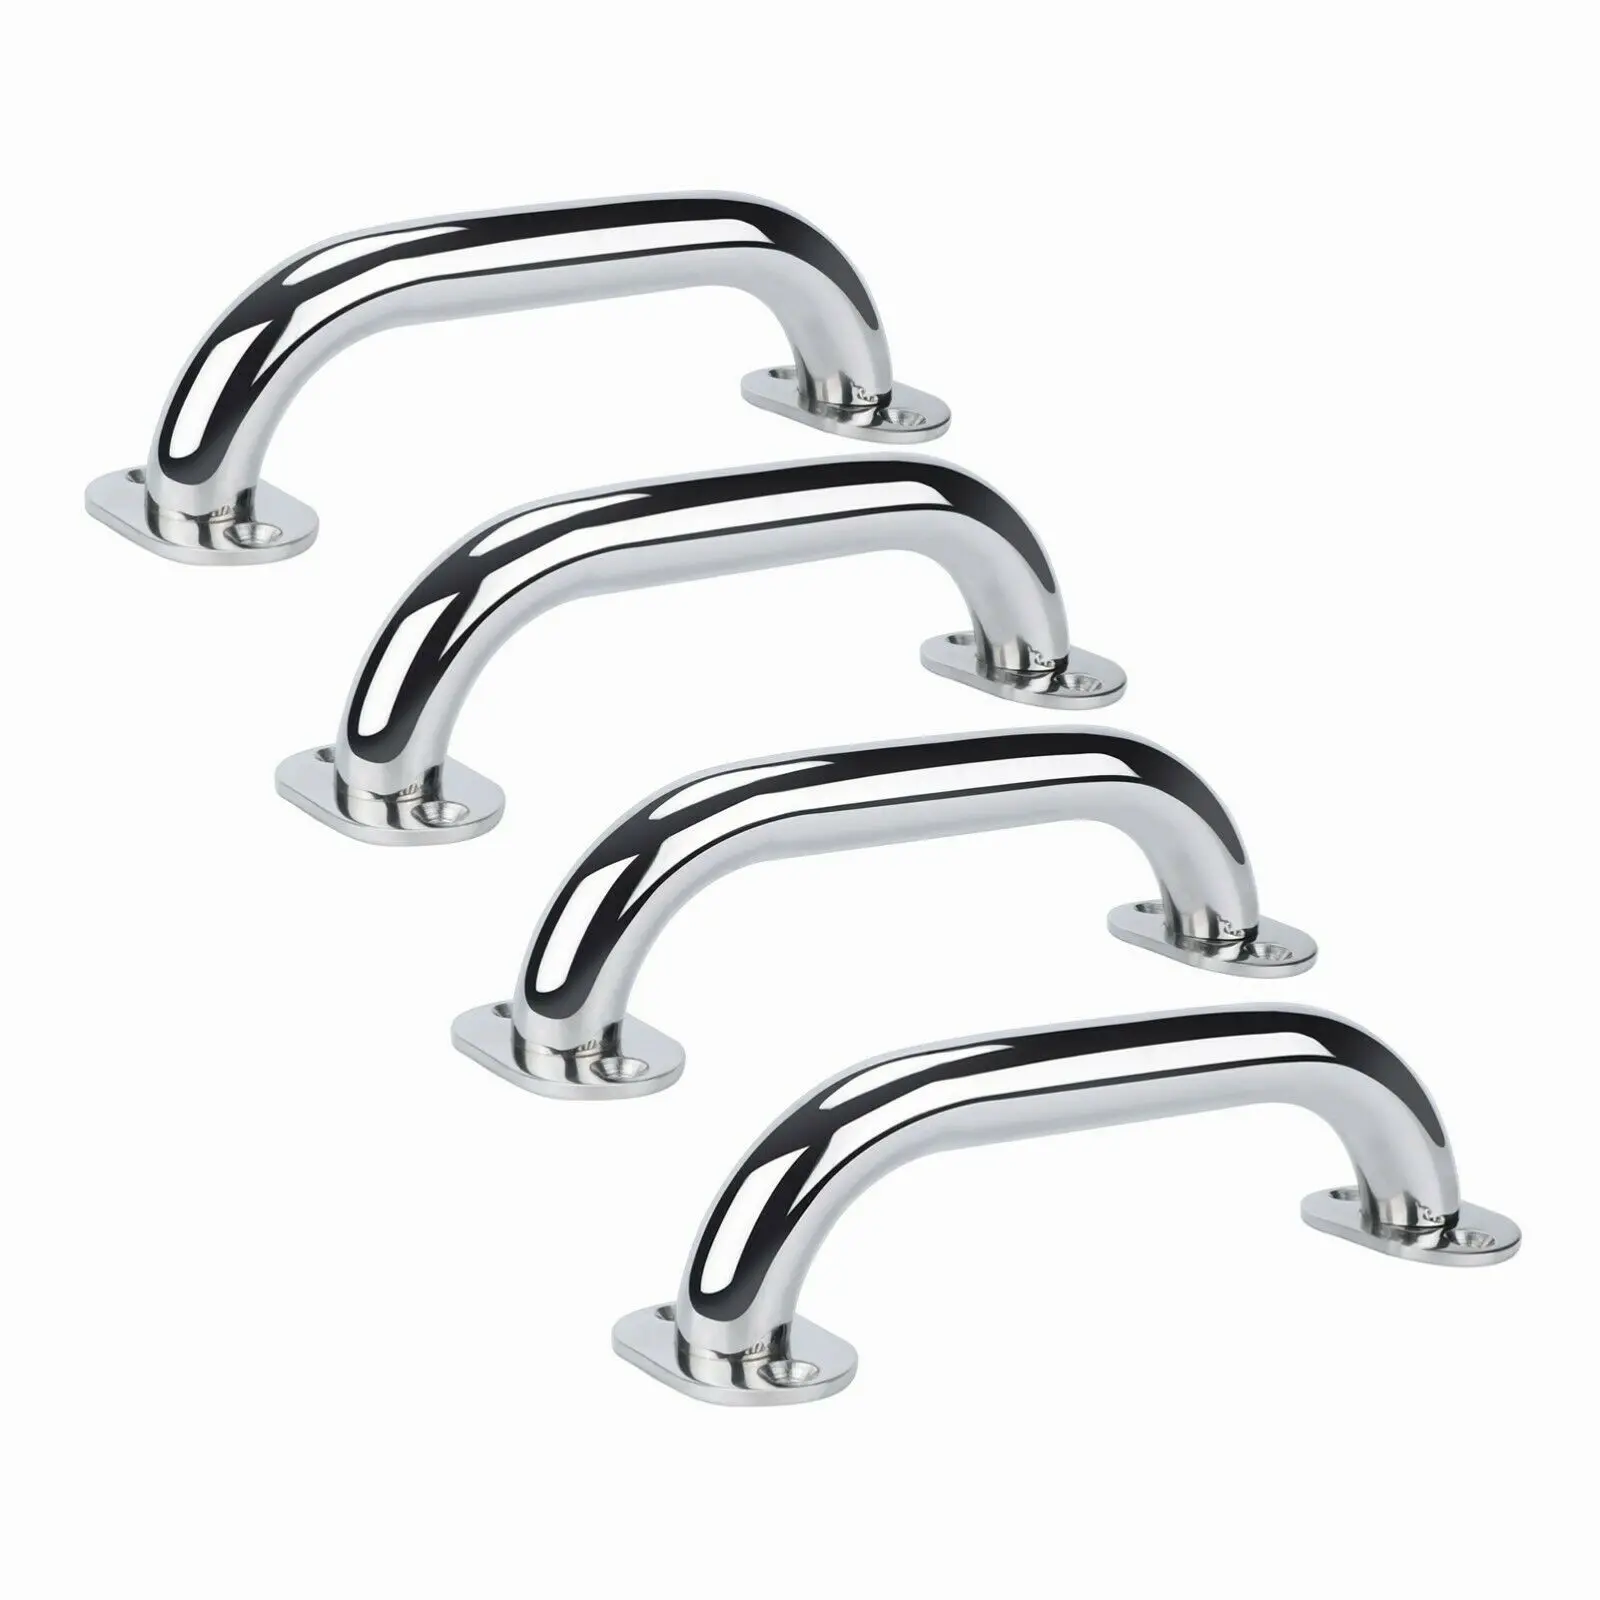 Door Handle 4 Pieces Stainless steel 9'' Boat Polished Boat Marine Grab Handle Handrail Boat Accessories